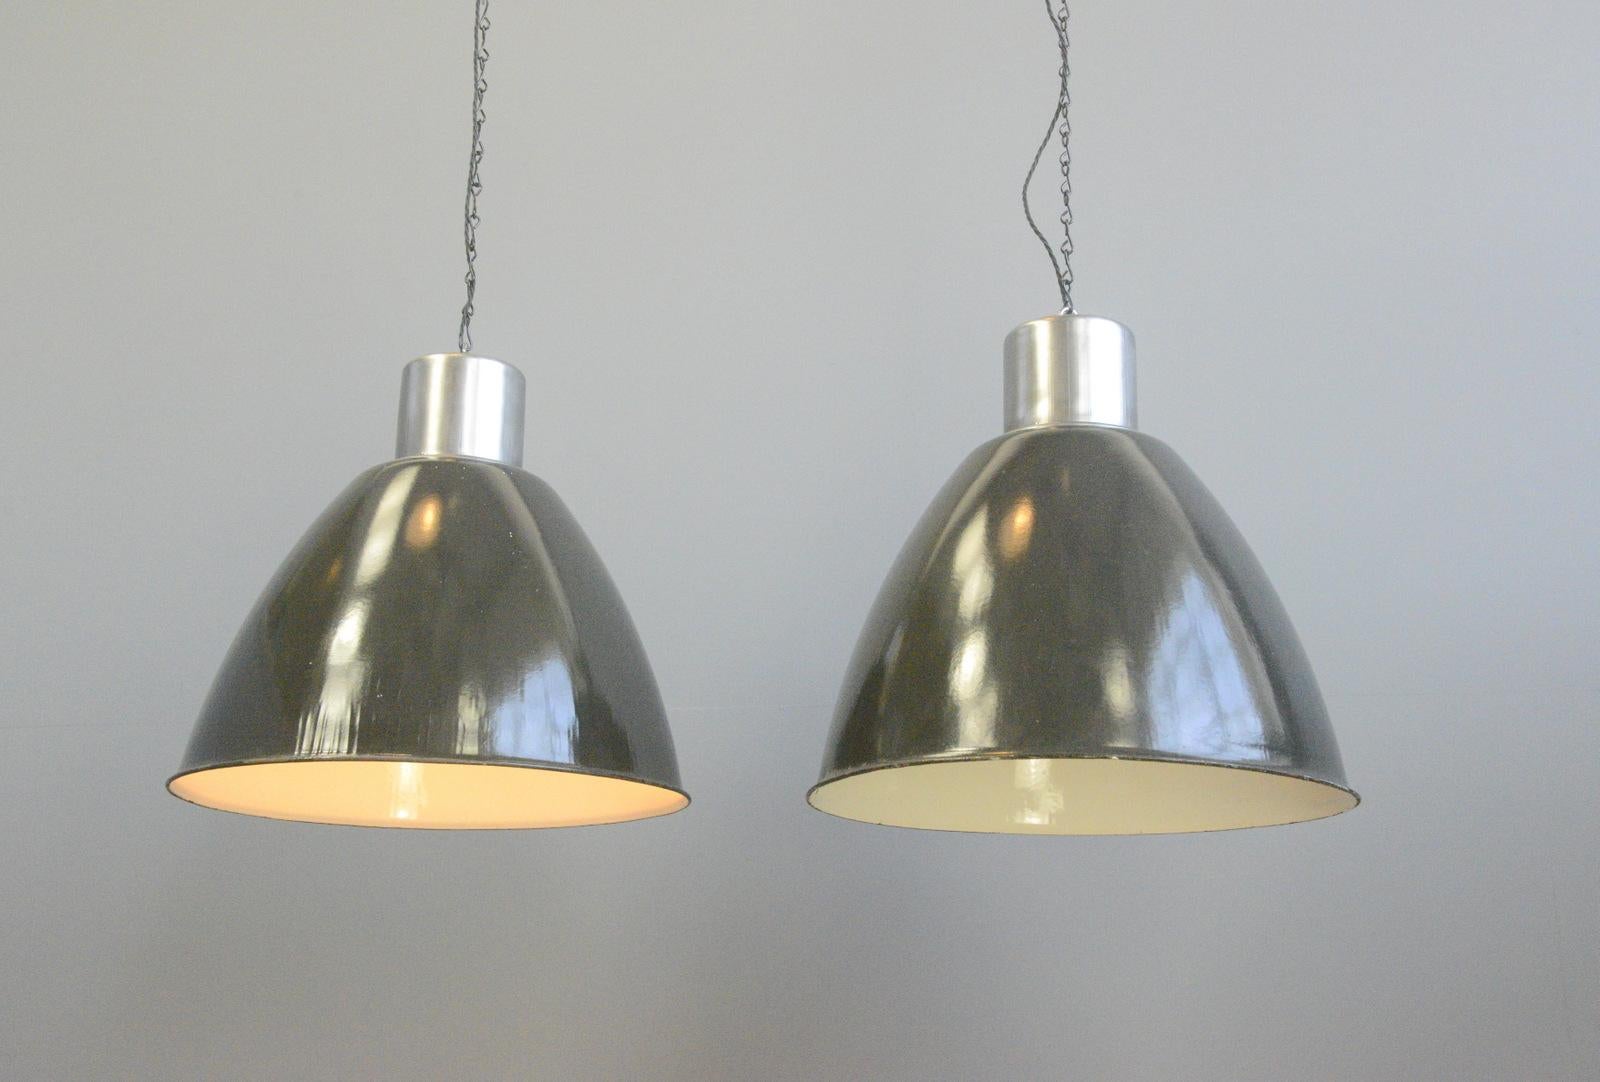 Czech XL Industrial pendant lights Circa 1950s

- Vitreous black enamel shades
- Brushed steel tops
- Takes E27 fitting bulbs
- Comes with 120cm of black cable
- Comes with chain and ceiling rose
- Czech ~ 1950s
- 53cm wide x 50cm